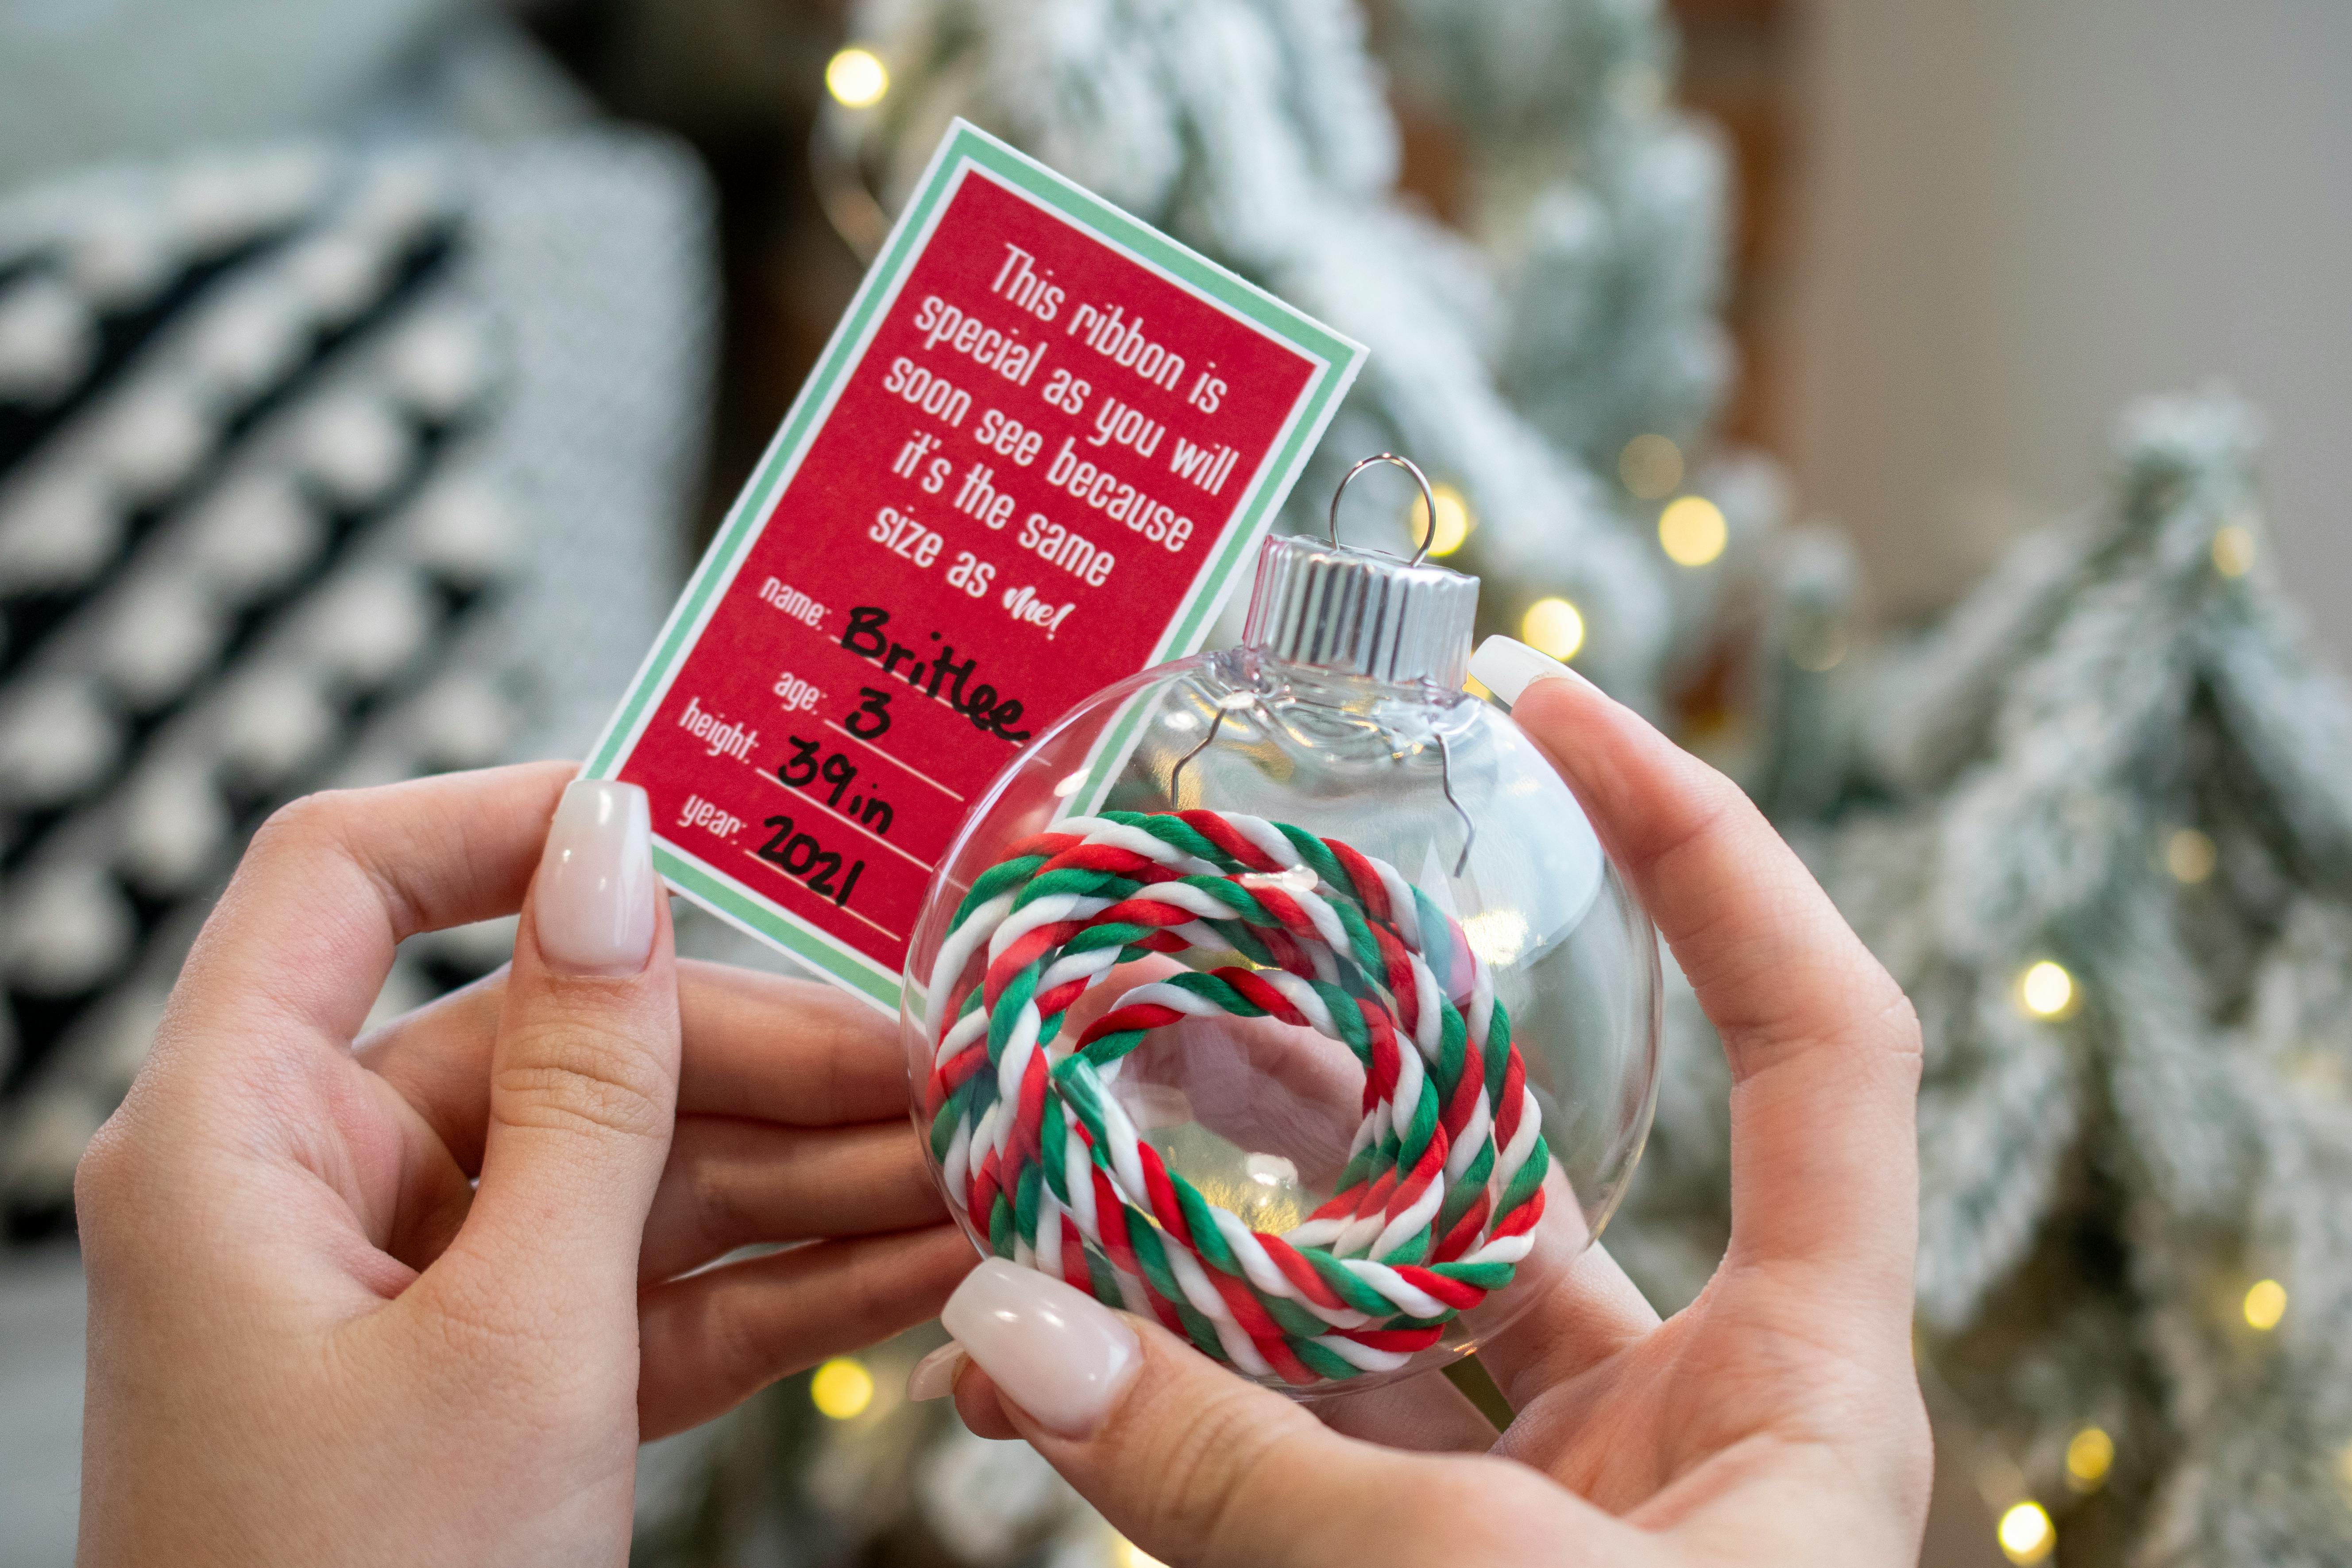 Someone holding a clear ornament with a ribbon inside it with a tag that says "This ribbon is special as you will soon see because it's the same size as me! With the name, age, height of a child and the year